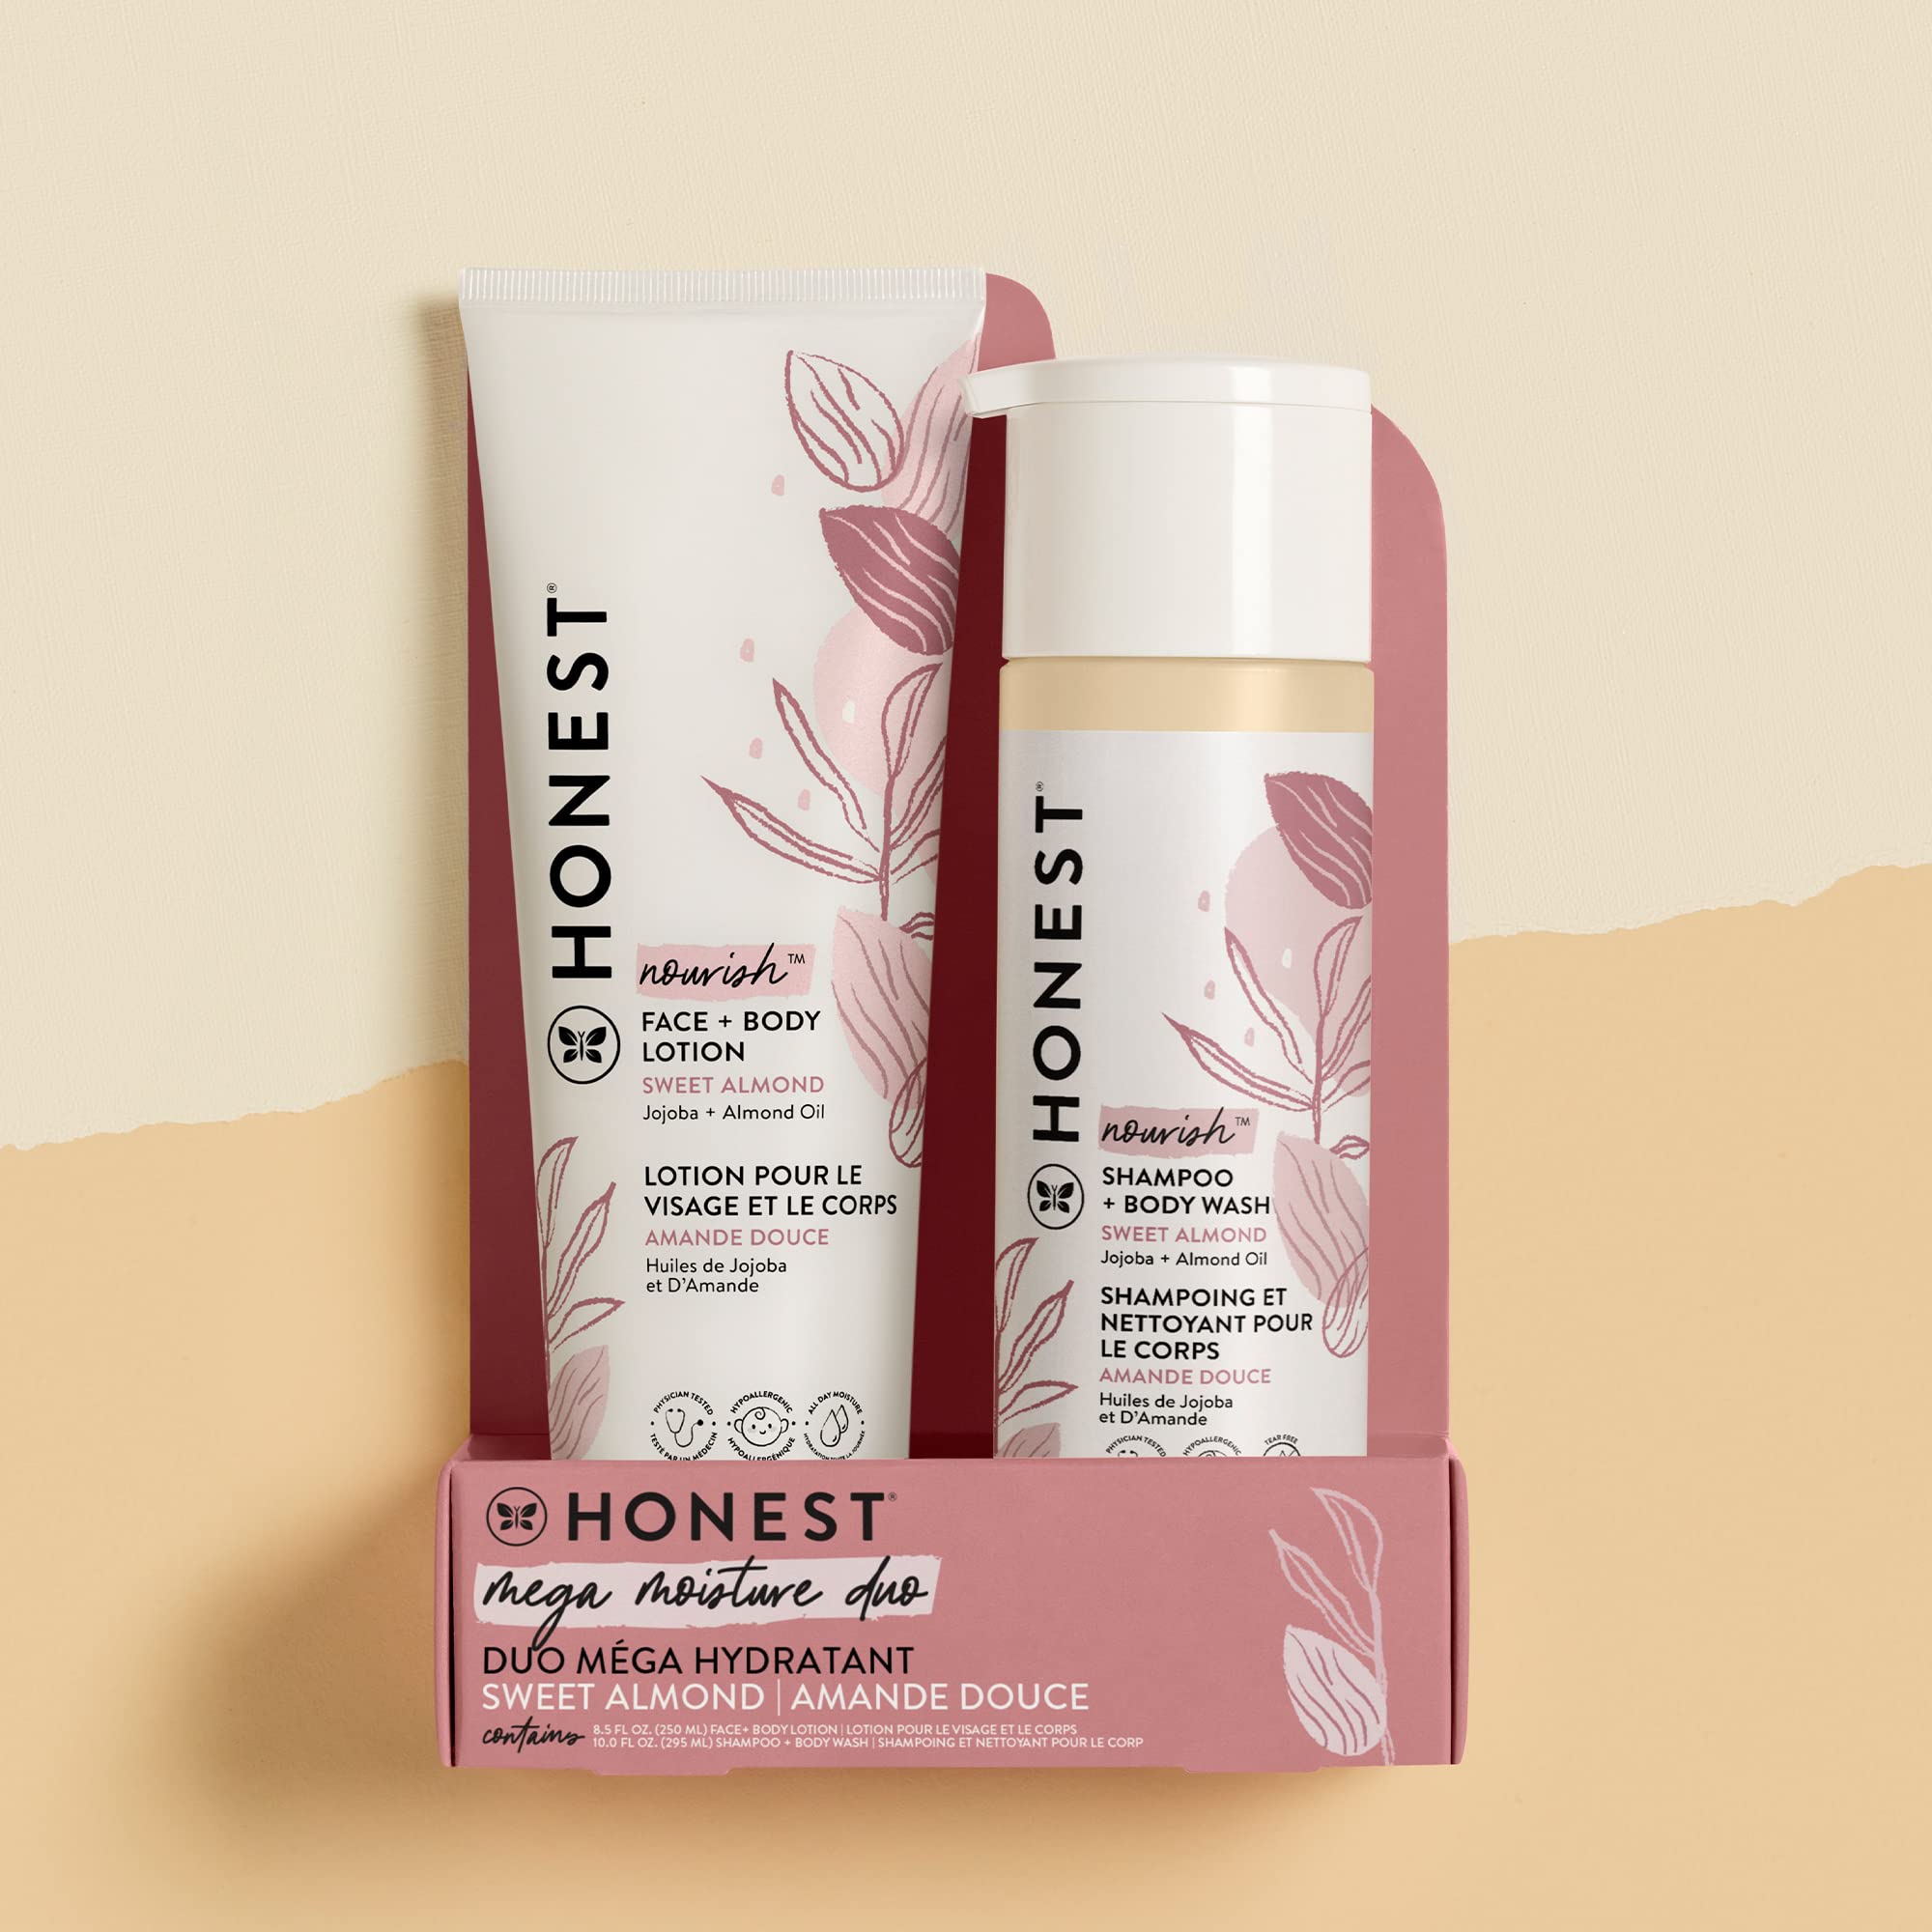 The Honest Company 2-in-1 Cleansing Shampoo + Body Wash and Face Lotion Bundle | Gentle for Baby | Naturally Derived | Sweet Almond Nourish, 18.5 fl oz